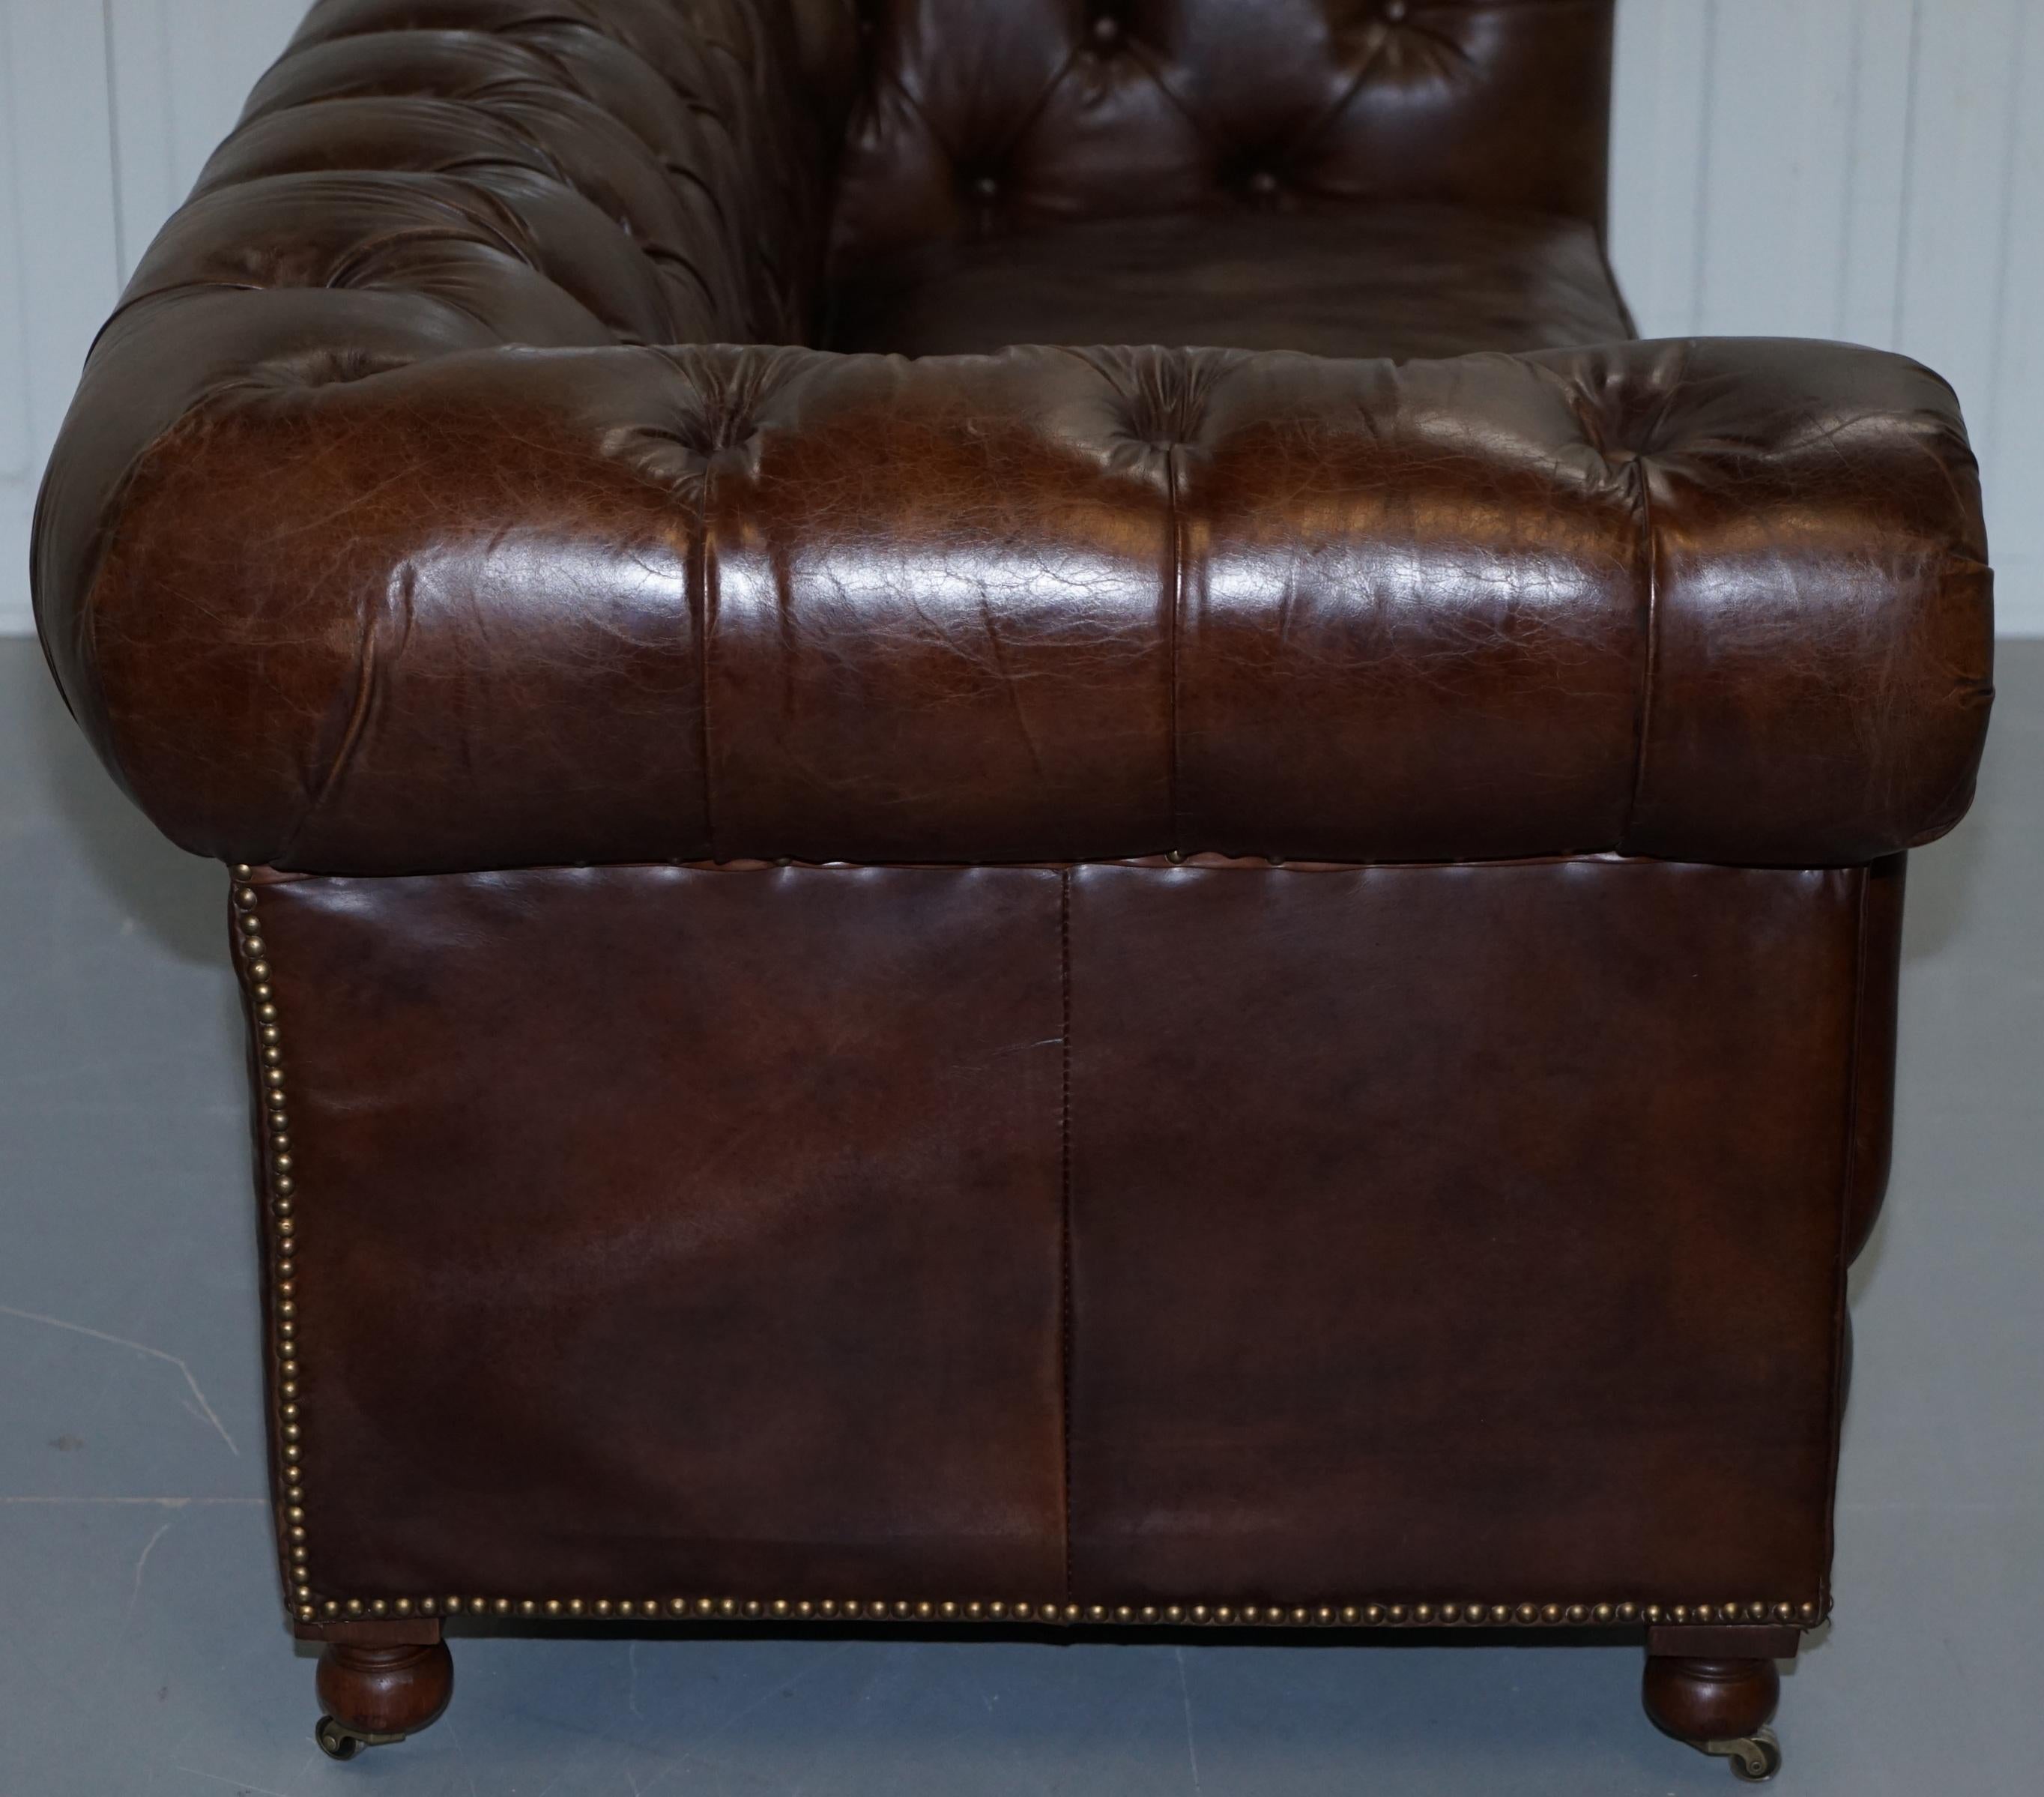 Stunning Timothy Oulton Westminster Brown Leather Chesterfield Sofa 10